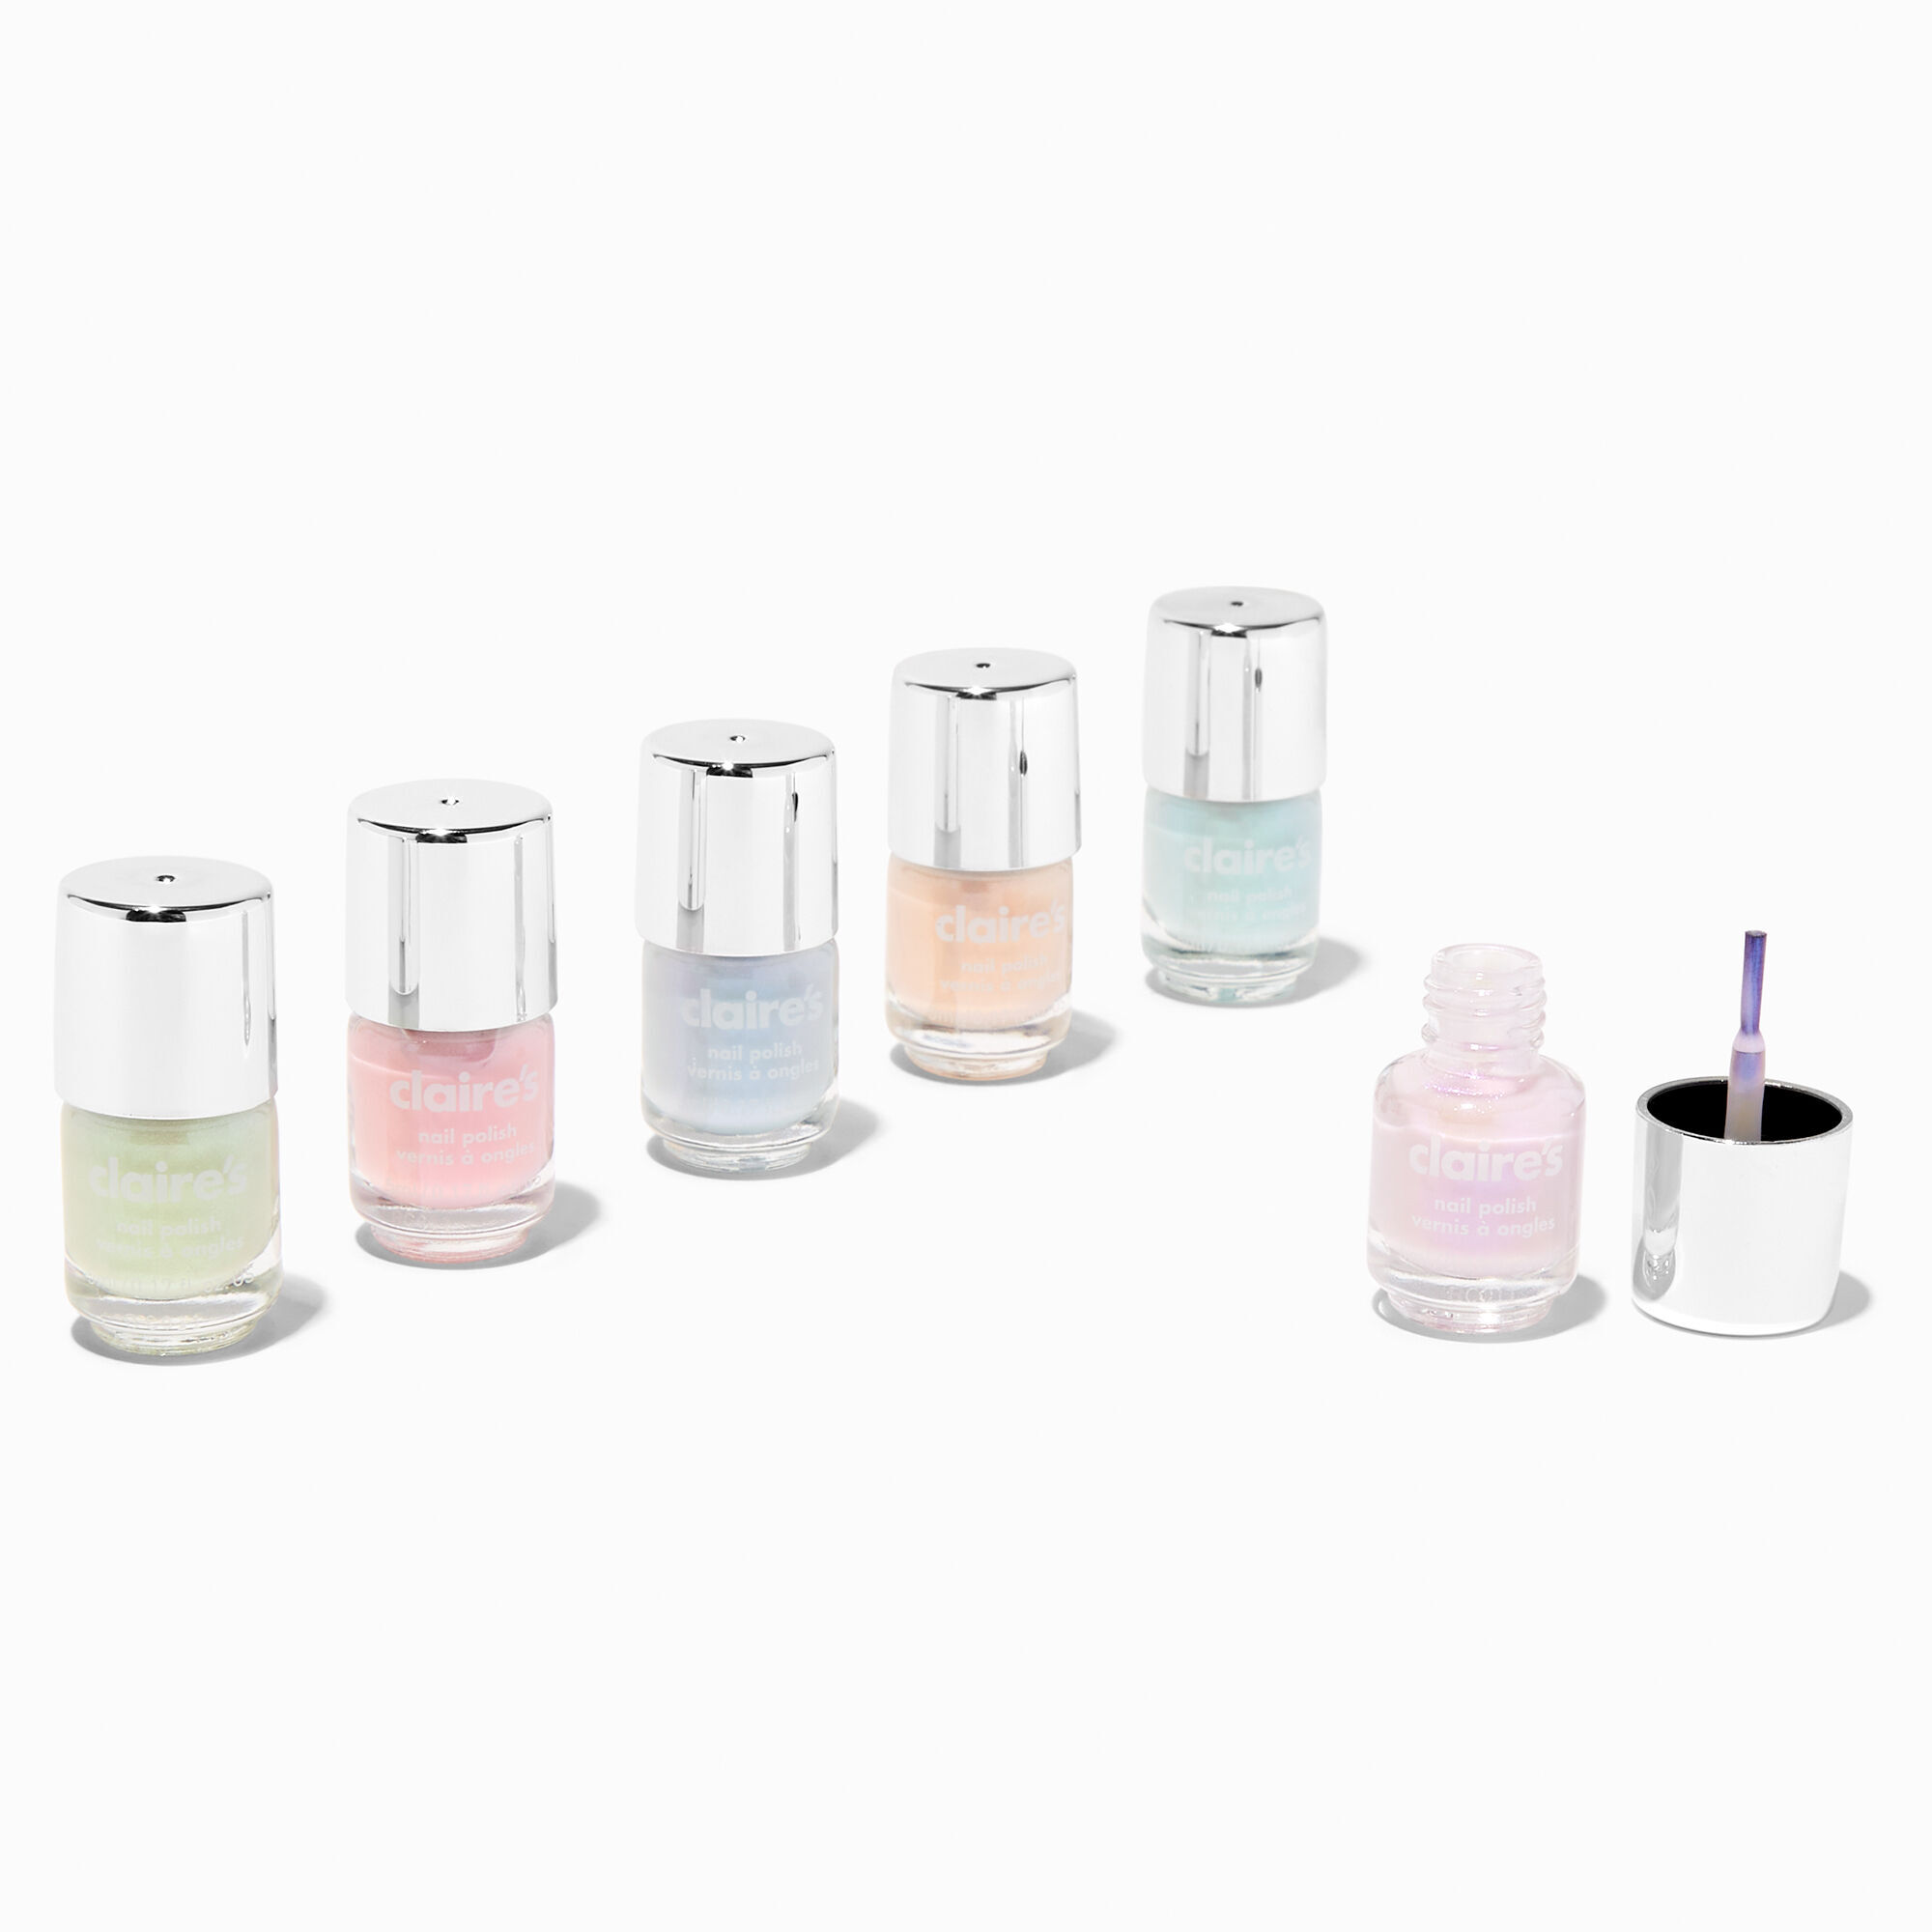 RYUK Lustrous 6-Piece Shine Nail Polish Kit for Dazzling Manicures  Multicolor - Price in India, Buy RYUK Lustrous 6-Piece Shine Nail Polish  Kit for Dazzling Manicures Multicolor Online In India, Reviews, Ratings